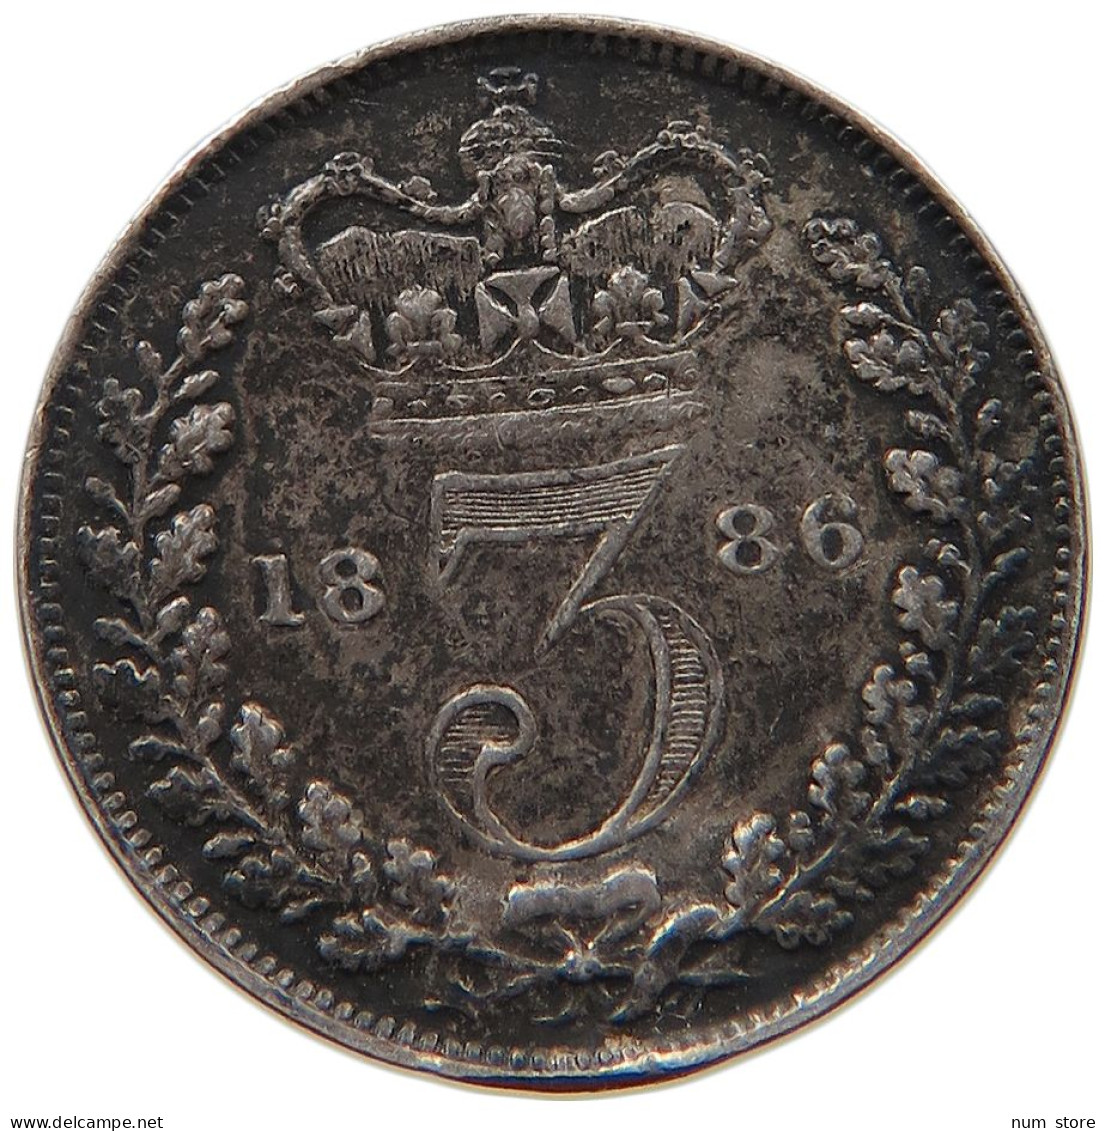 GREAT BRITAIN THREEPENCE 1886 Victoria 1837-1901 #s017 0041 - F. 3 Pence